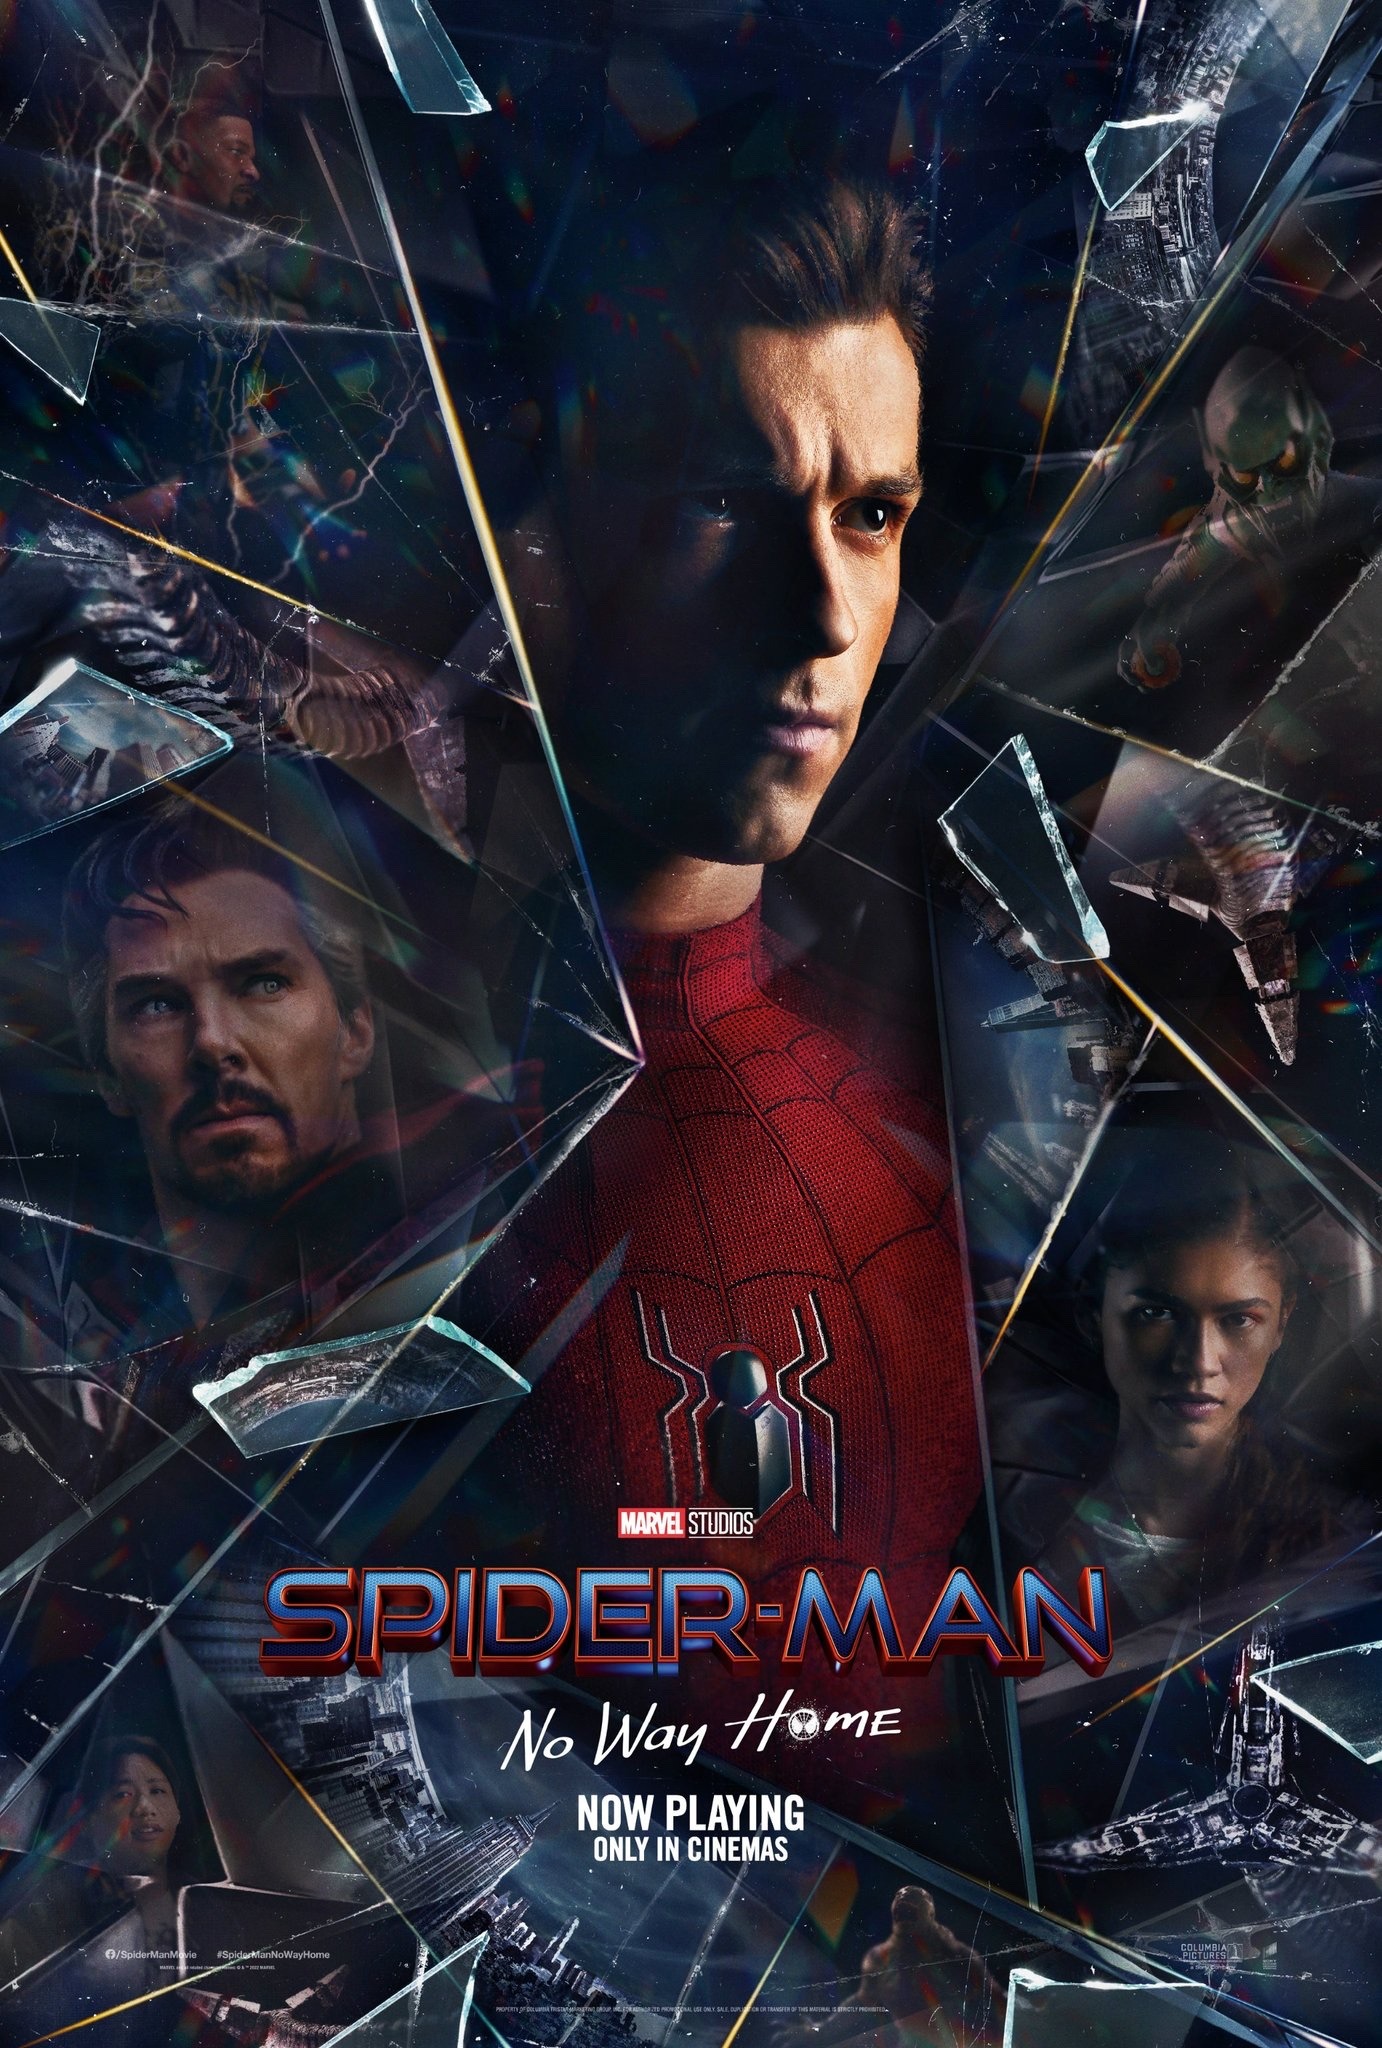 Spider-Man: No Way Home | Promotional Poster